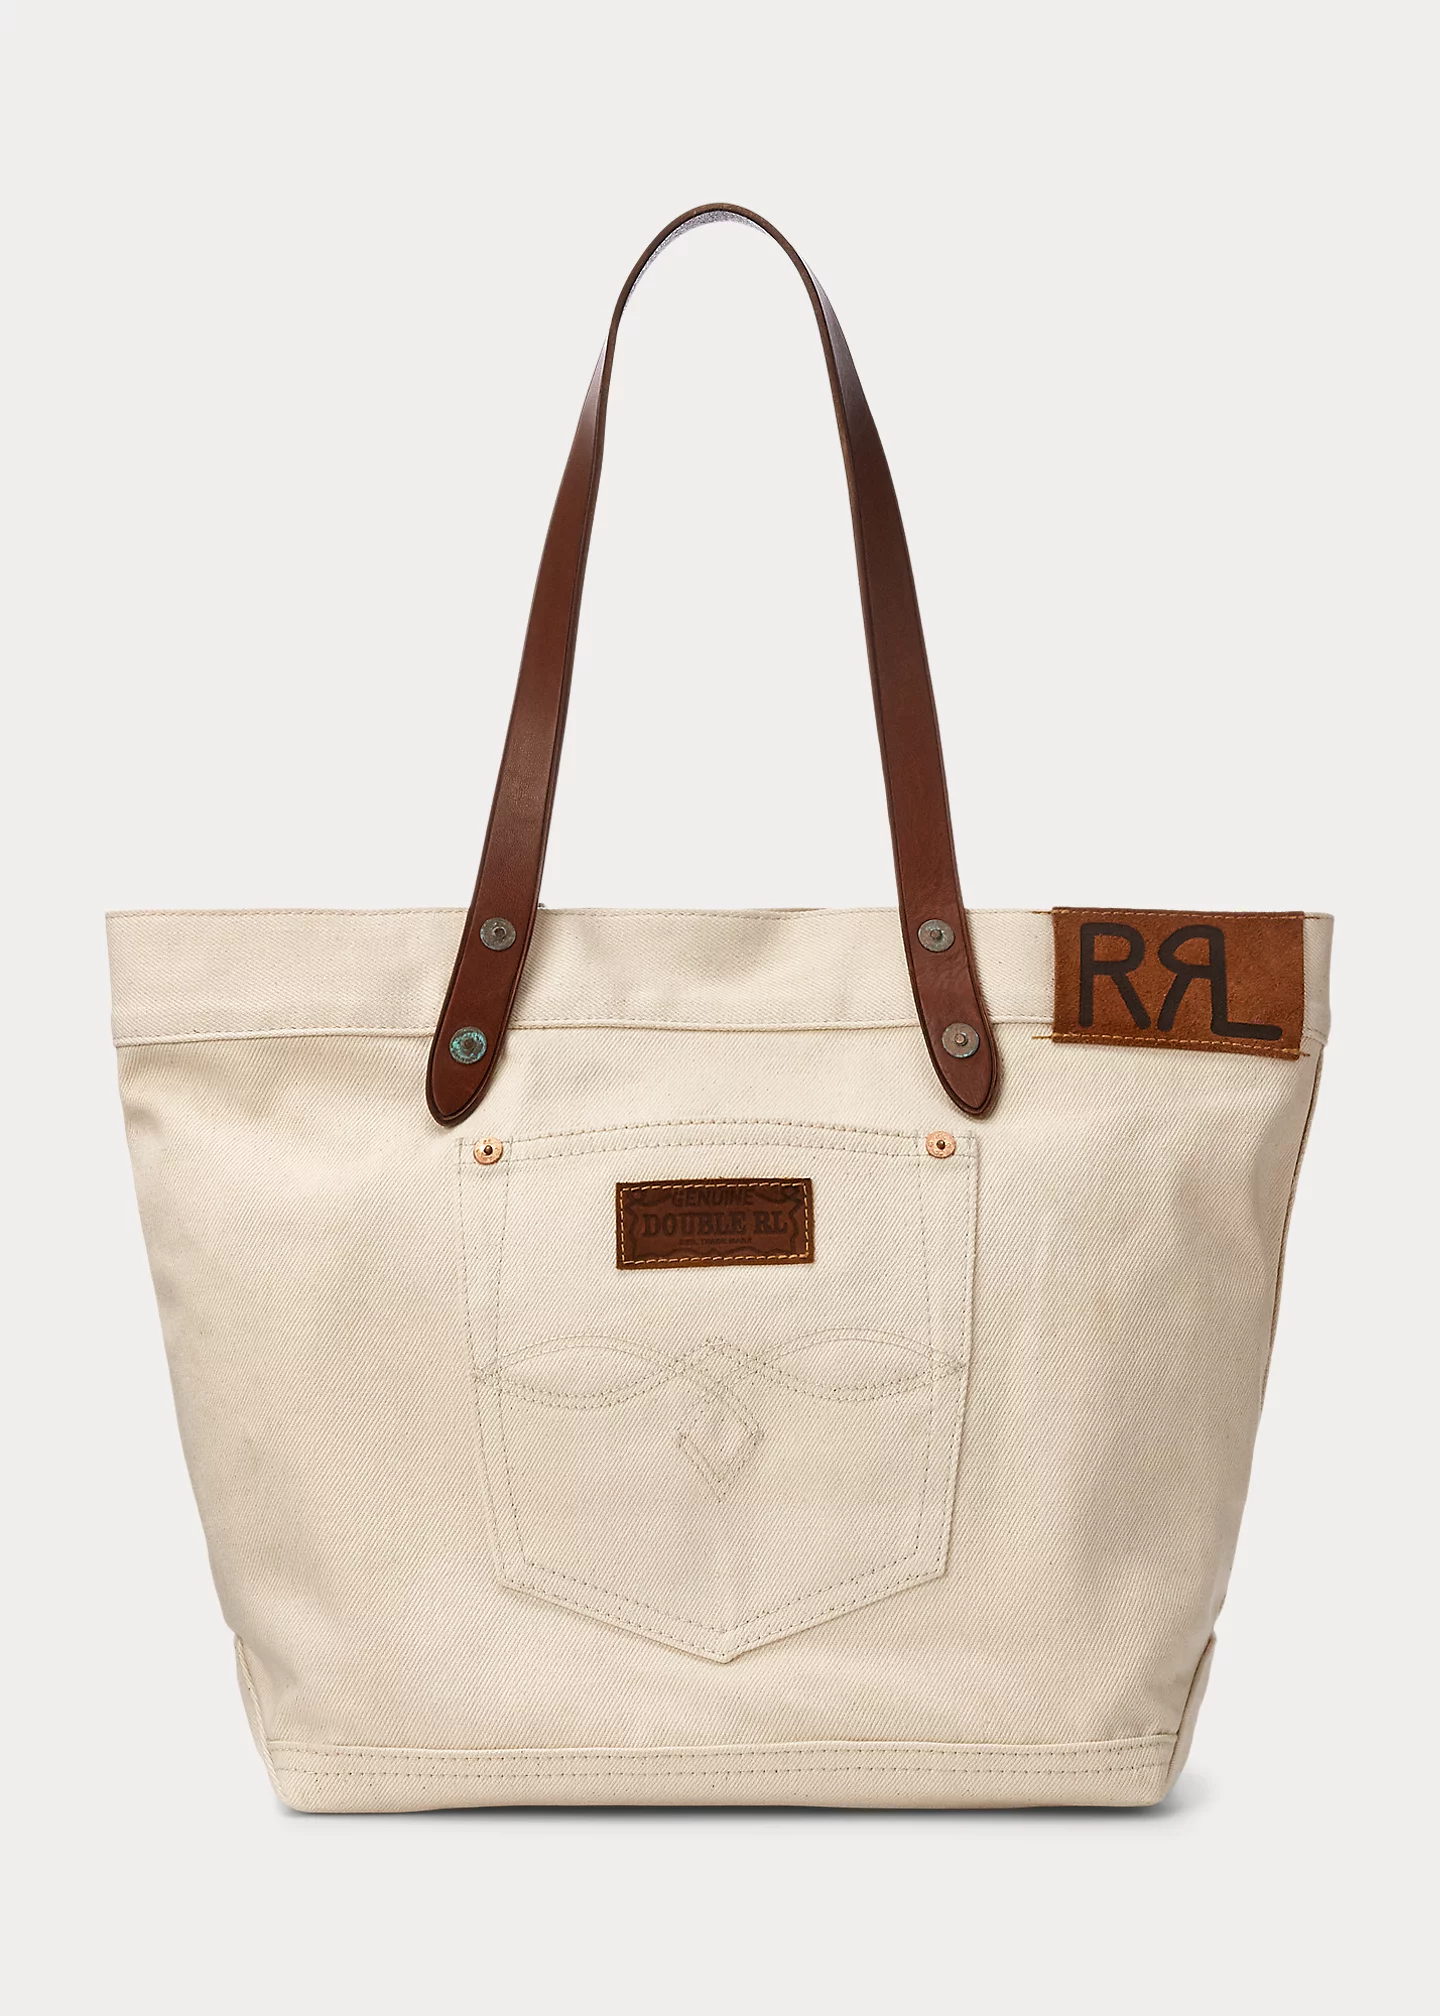 Providing stylish and savvy shoppers with affordable bags